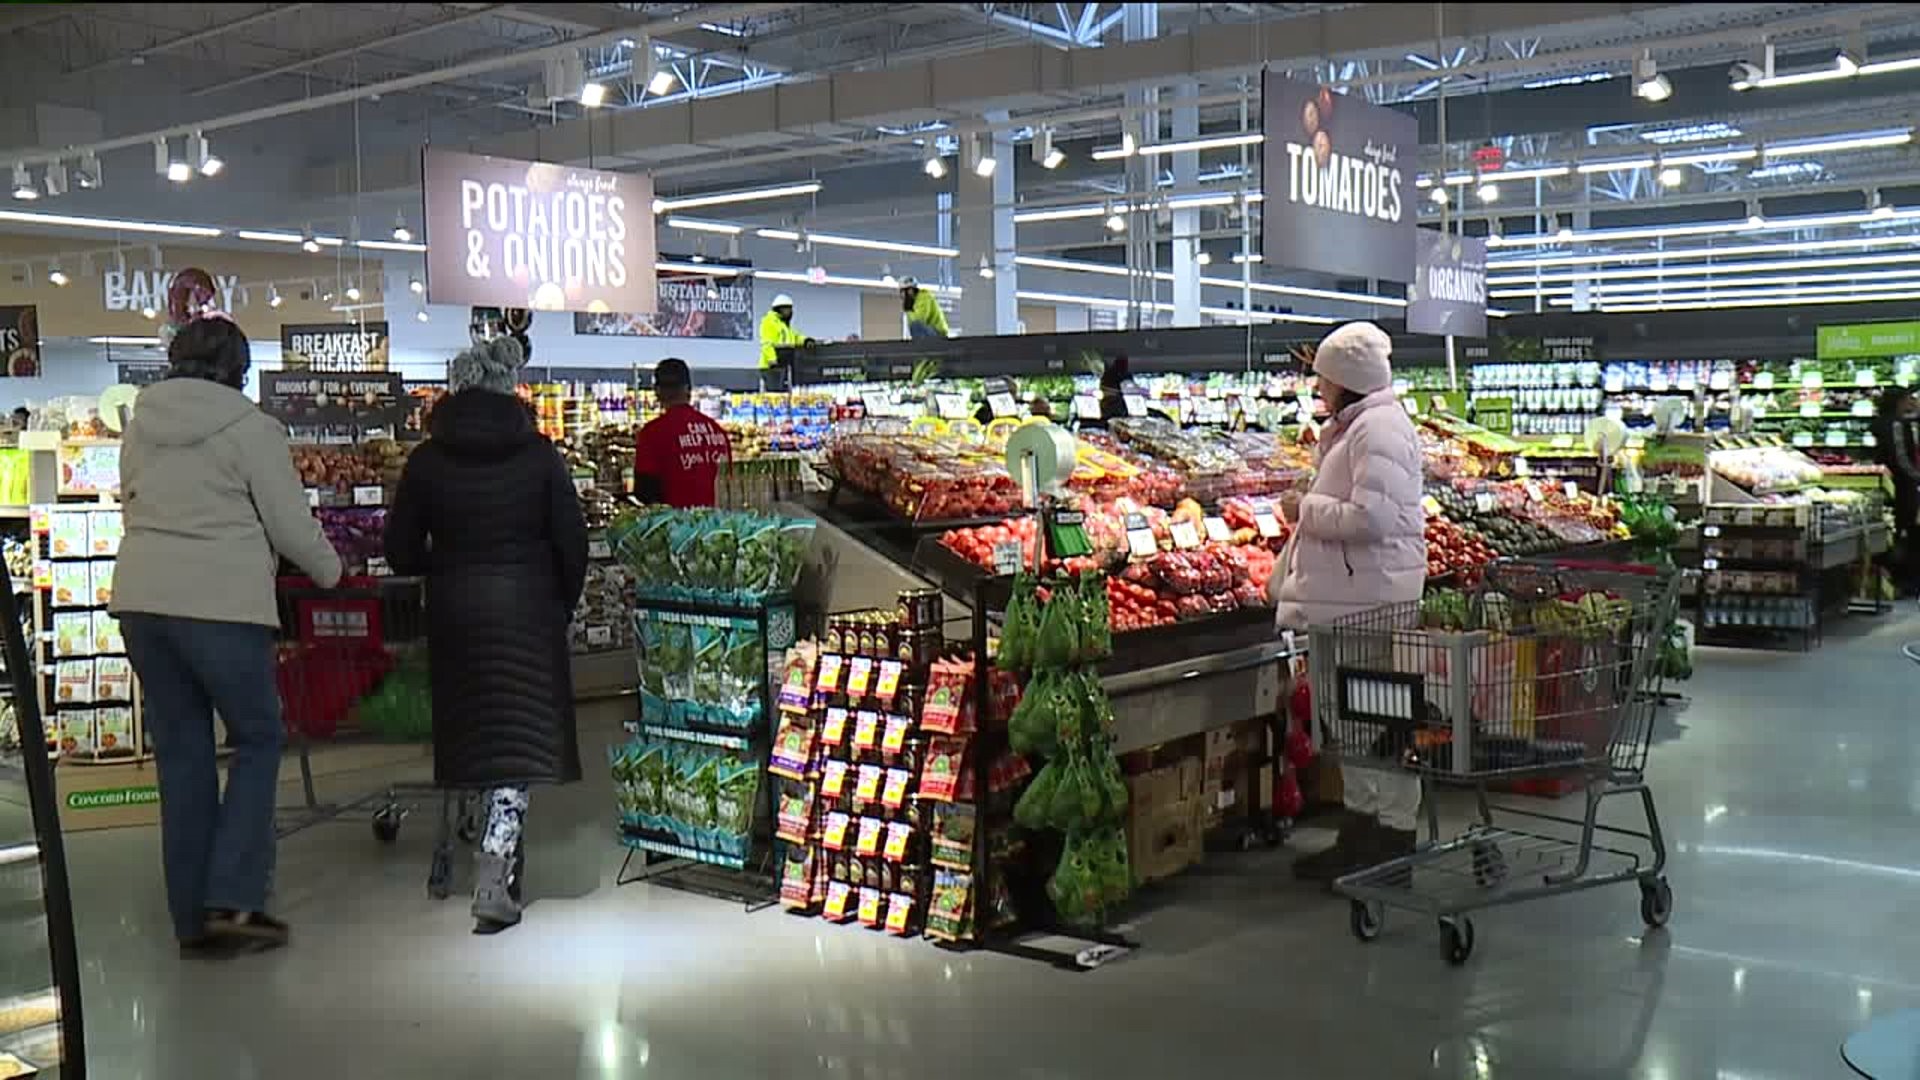 New Giant Store Opens in East Stroudsburg